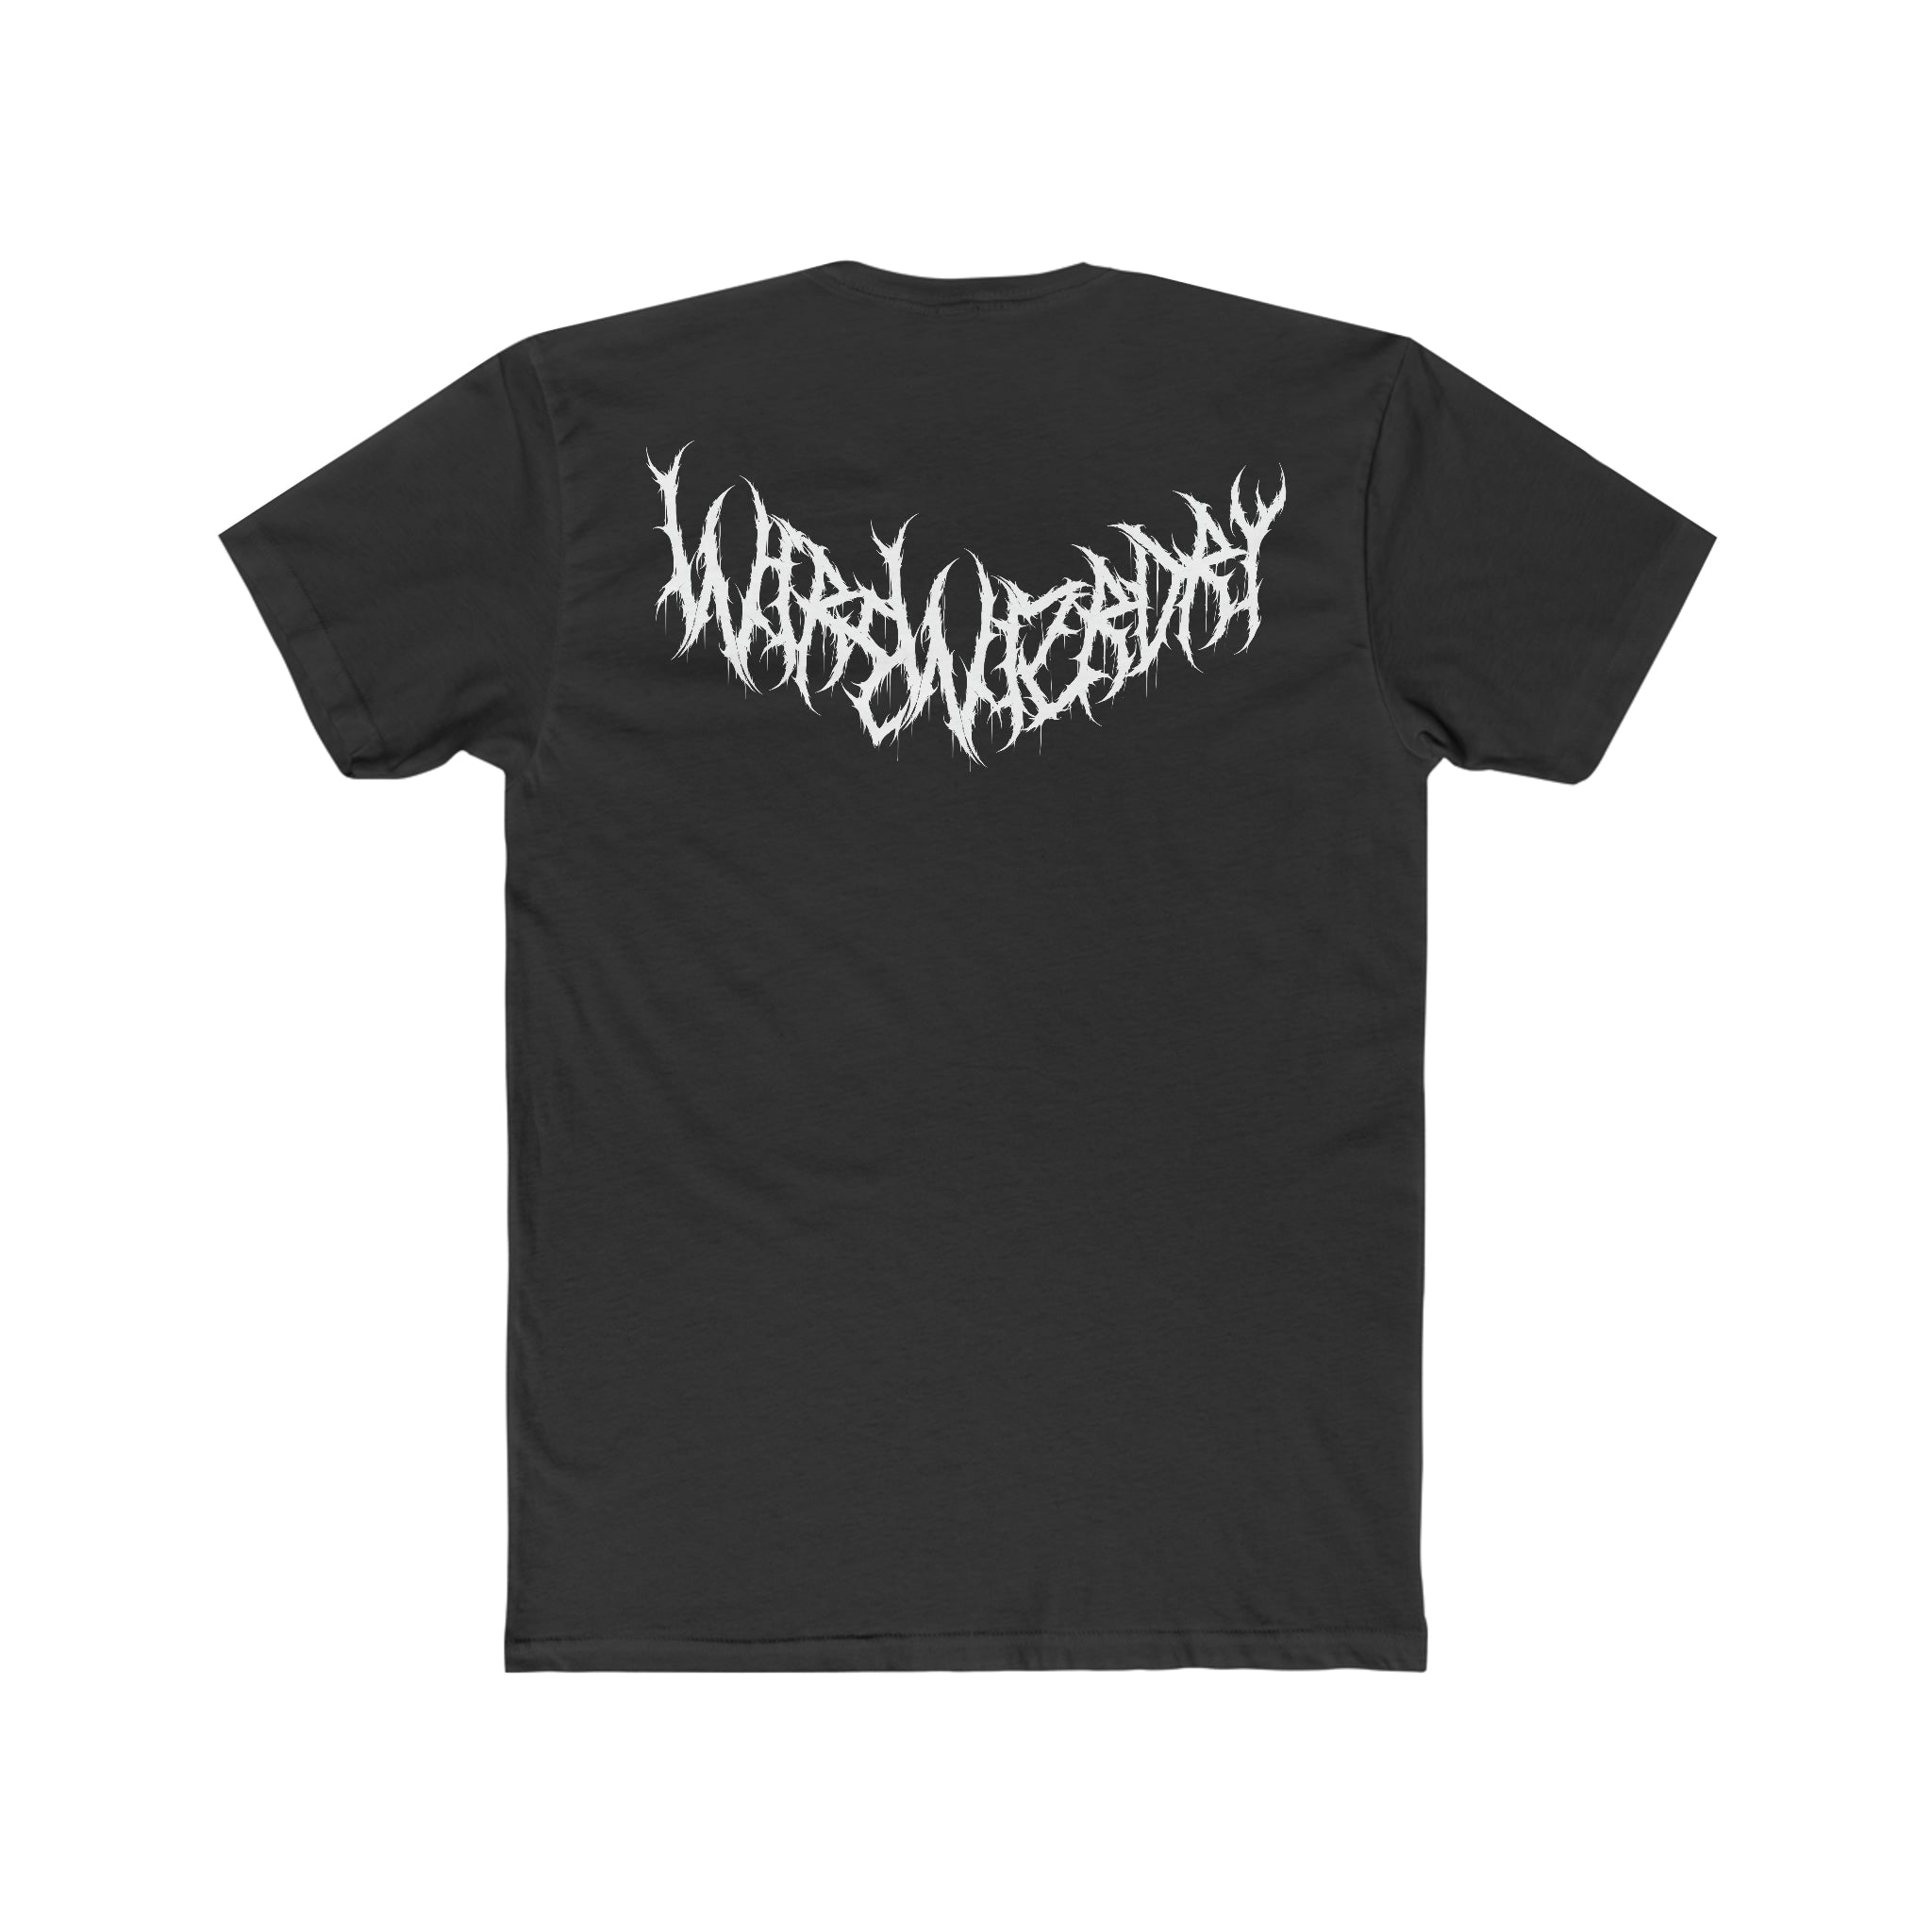 Wire Wizrdry Badge T-Shirt